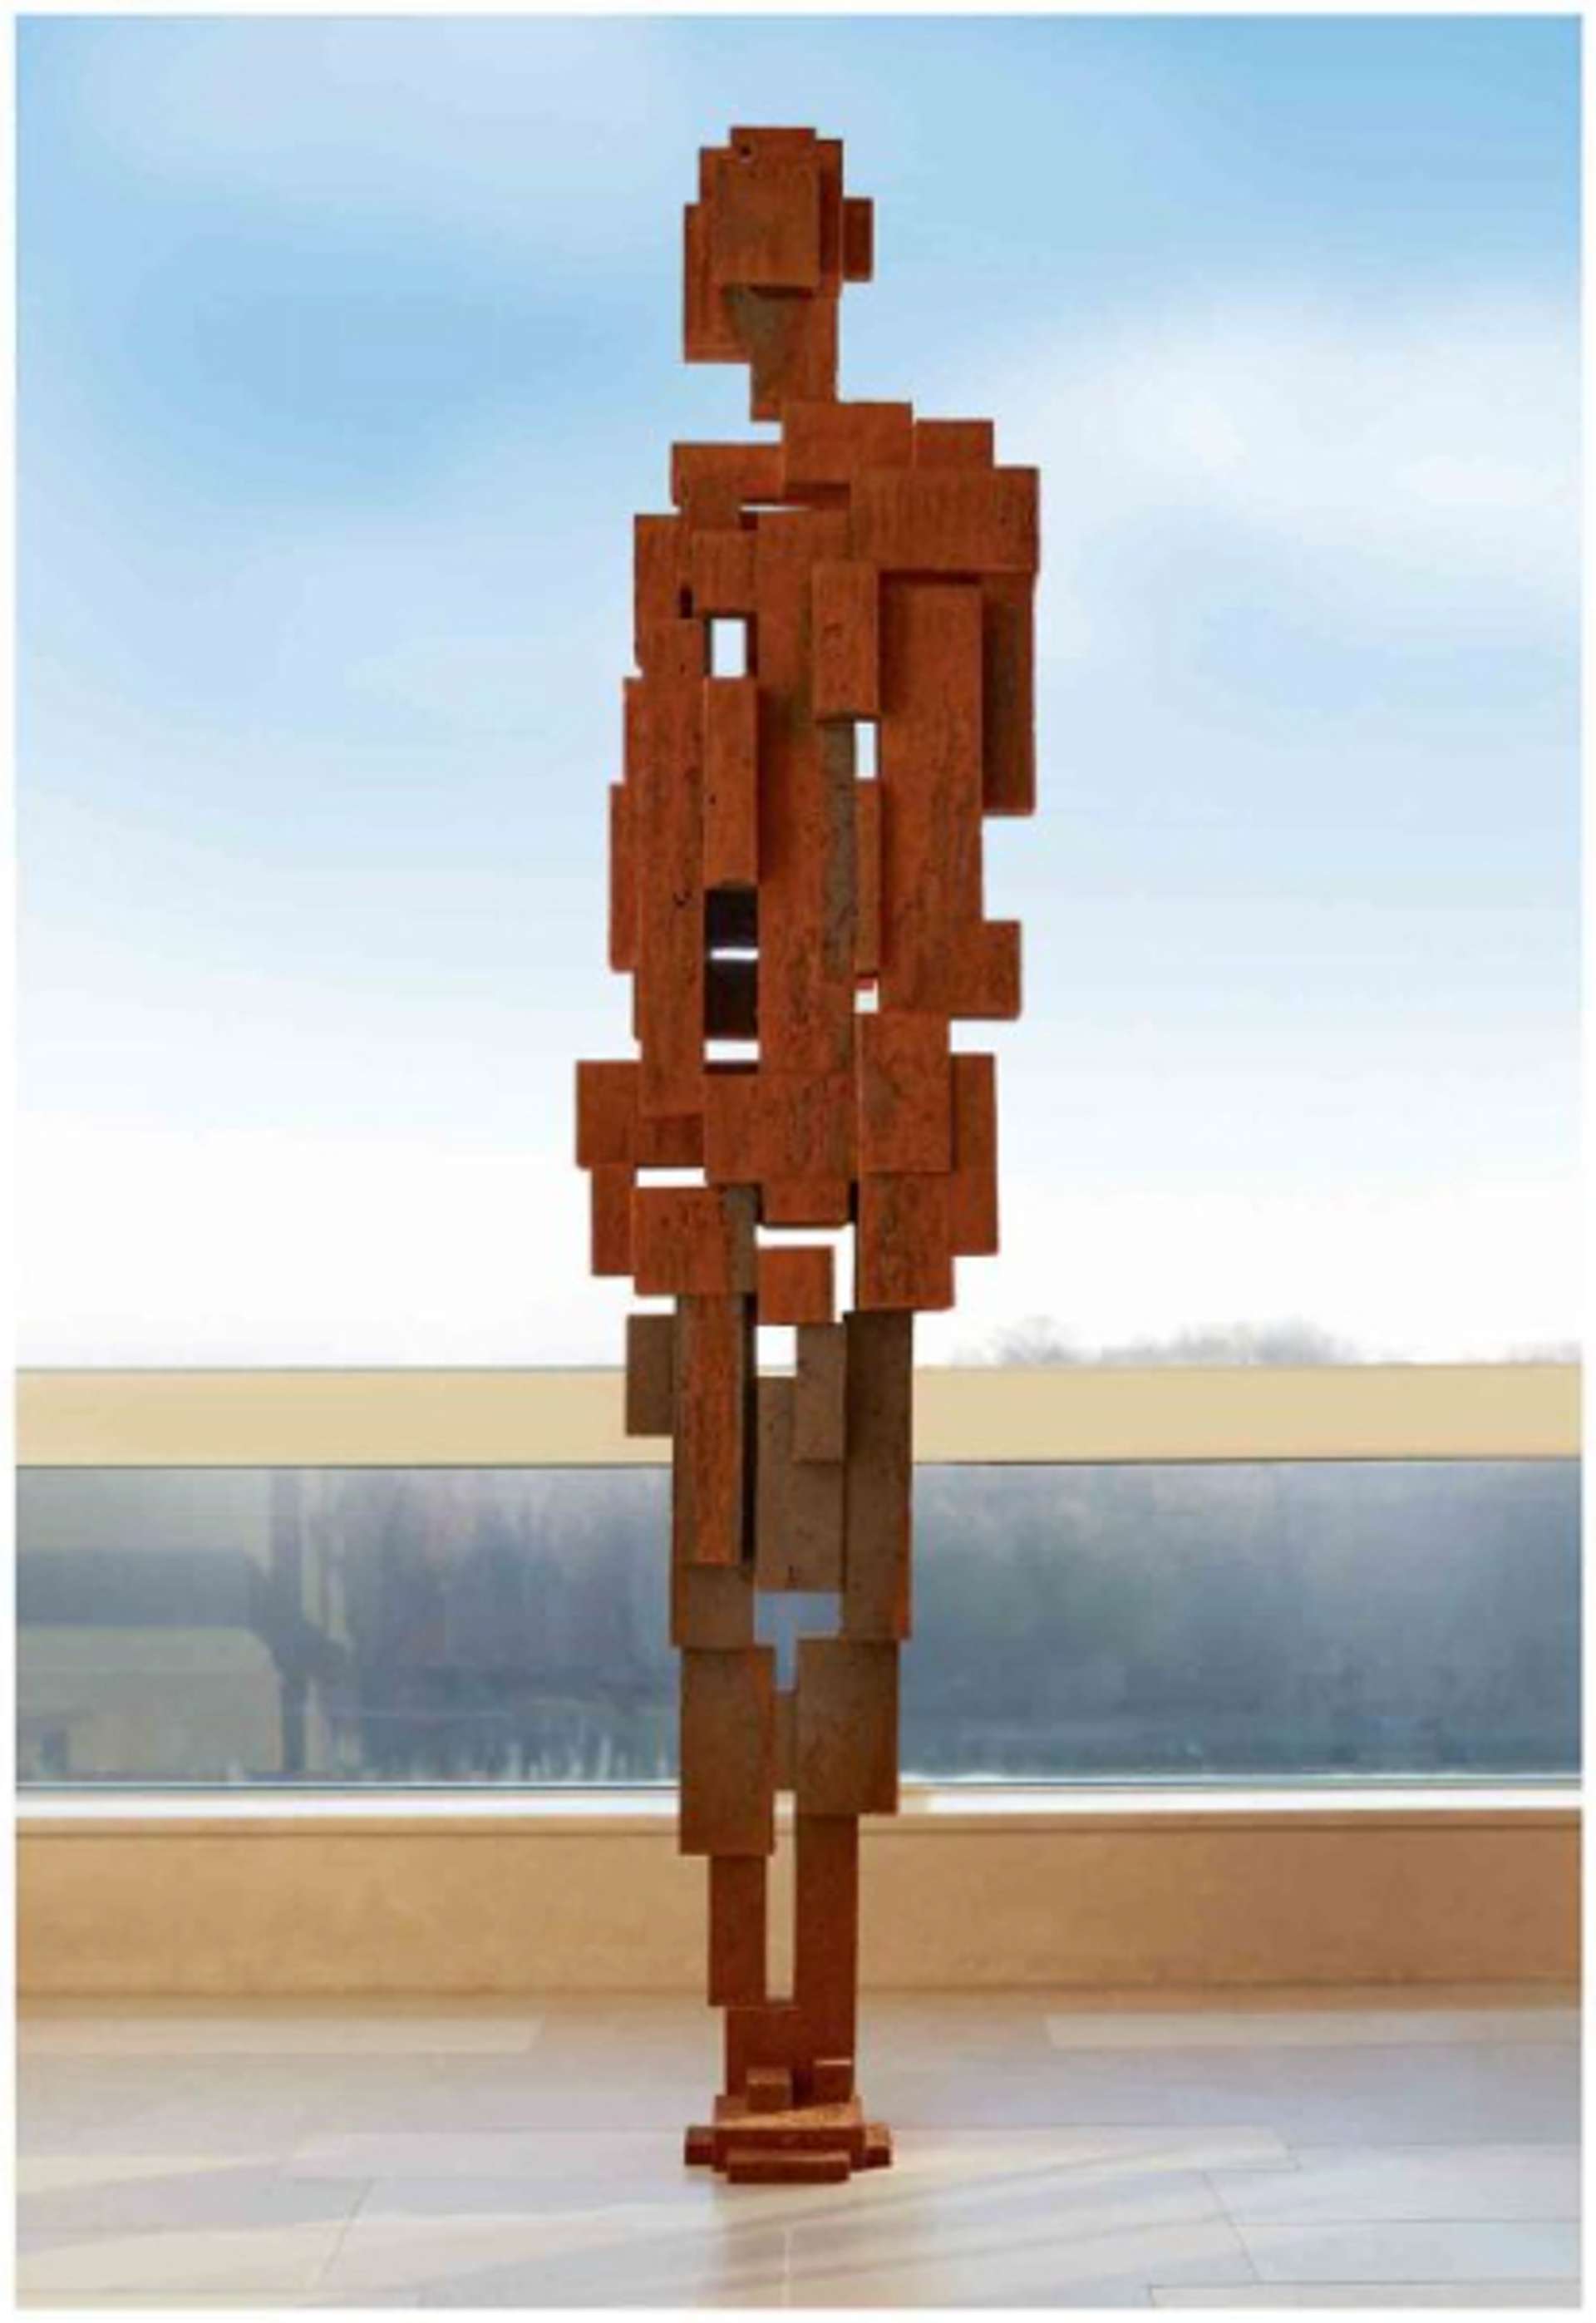  A towering life-sized sculpture of the human figure, crafted from carefully stacked cast iron plates, creating a sense of balance and harmony within the artwork. The sculpture is depicted on an outdoor patio, with the surrounding environment adding to its aesthetic appeal.